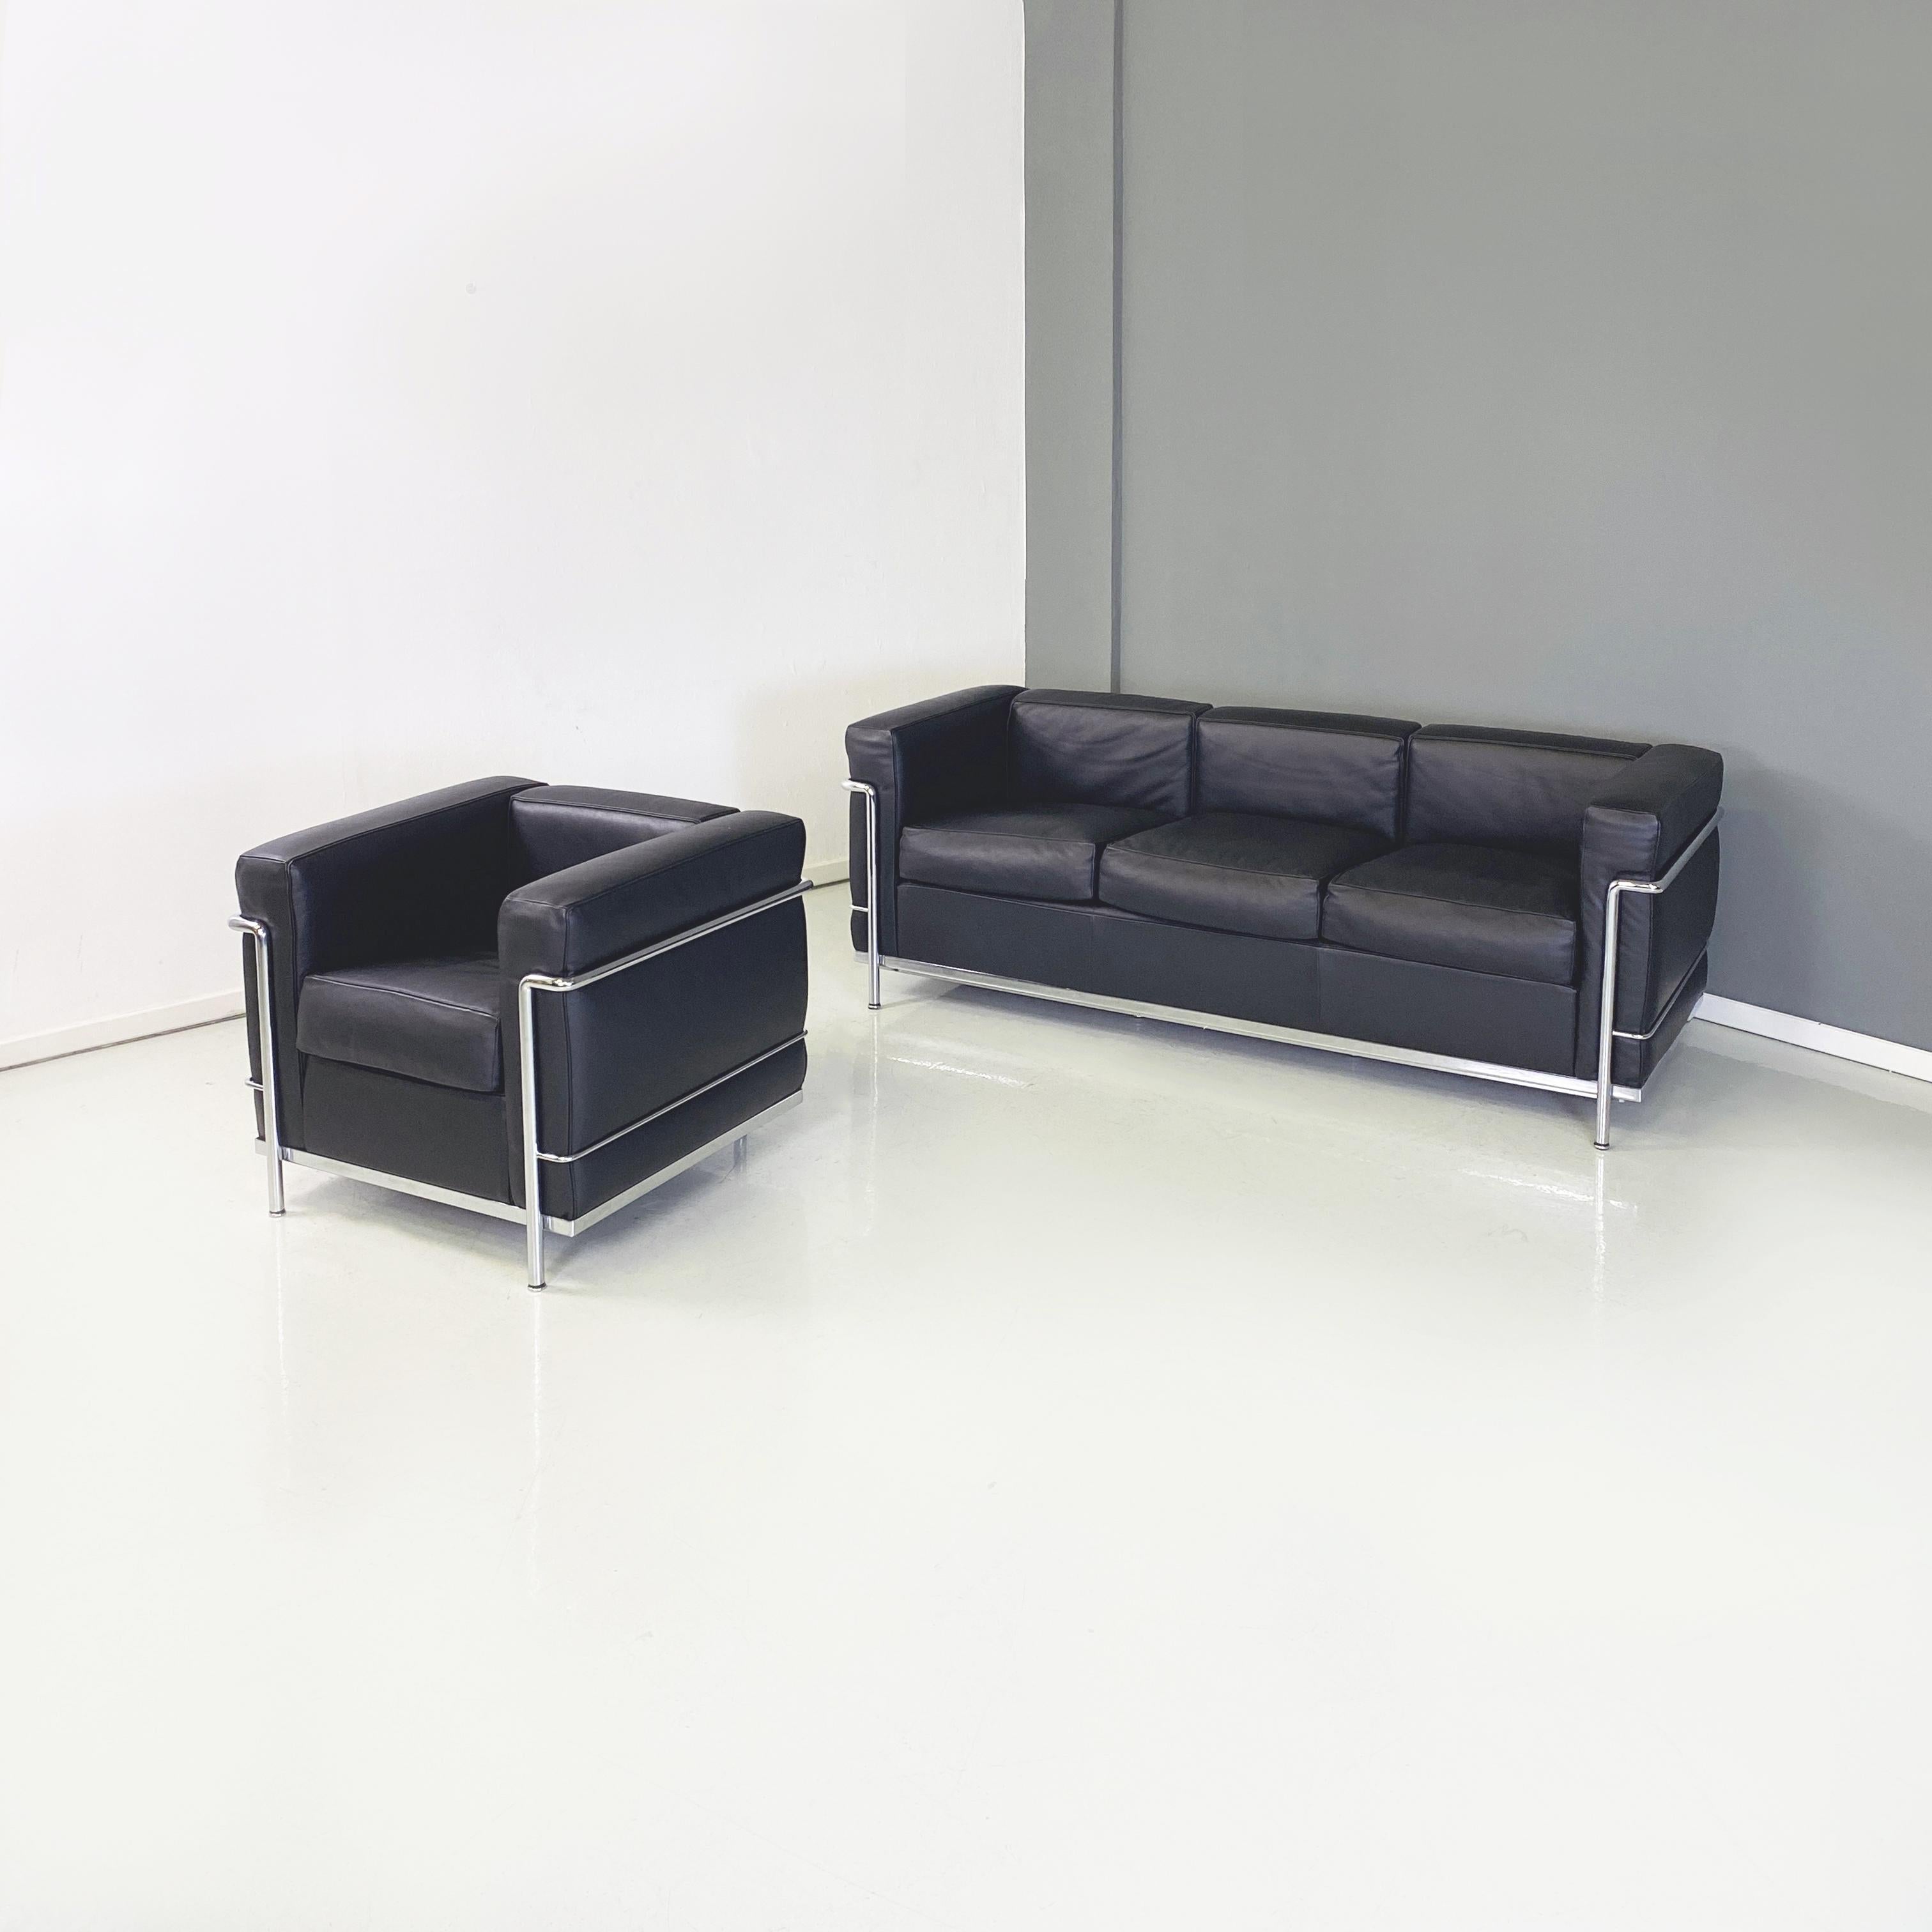 Italian modern Sofa and armchair LC by Le Corbusier, Jeanneret and Perriand for Cassina, 1980s
Three seater sofa mod. LC2 and armchair mod. LC3 with metal tubular structure. The squared seats, backrests and armrests are upholstered and upholstered